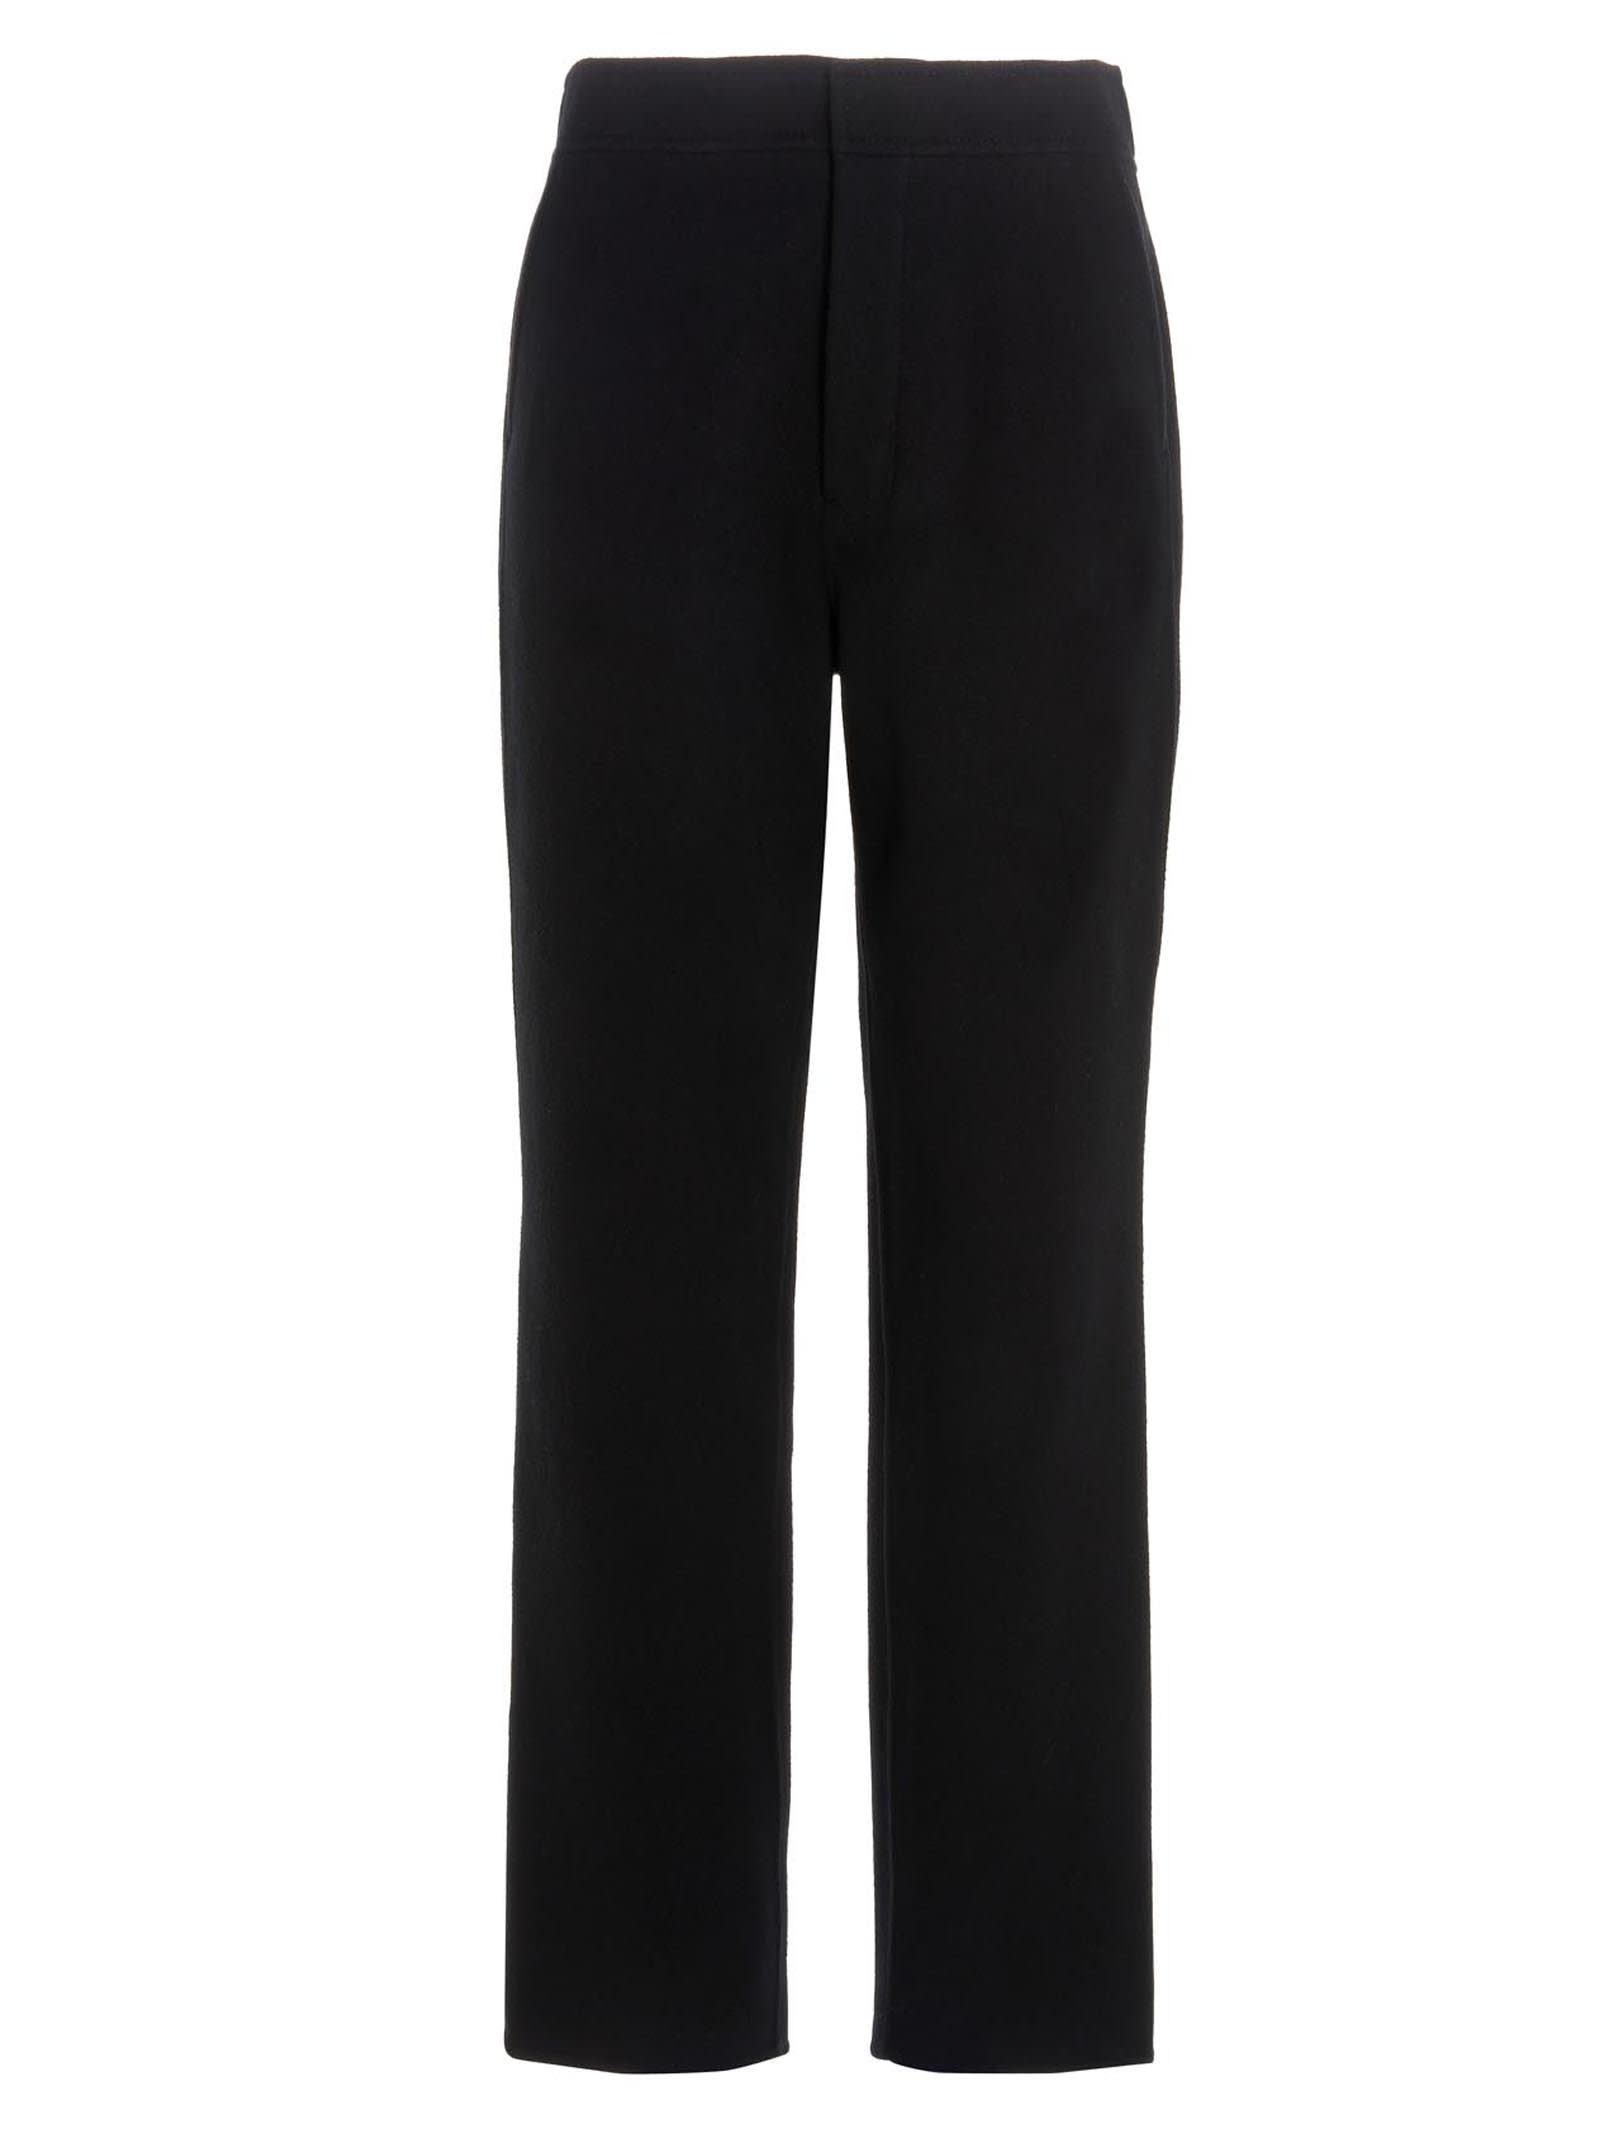 Ami Alexandre Mattiussi Wool And Cashmere Trousers